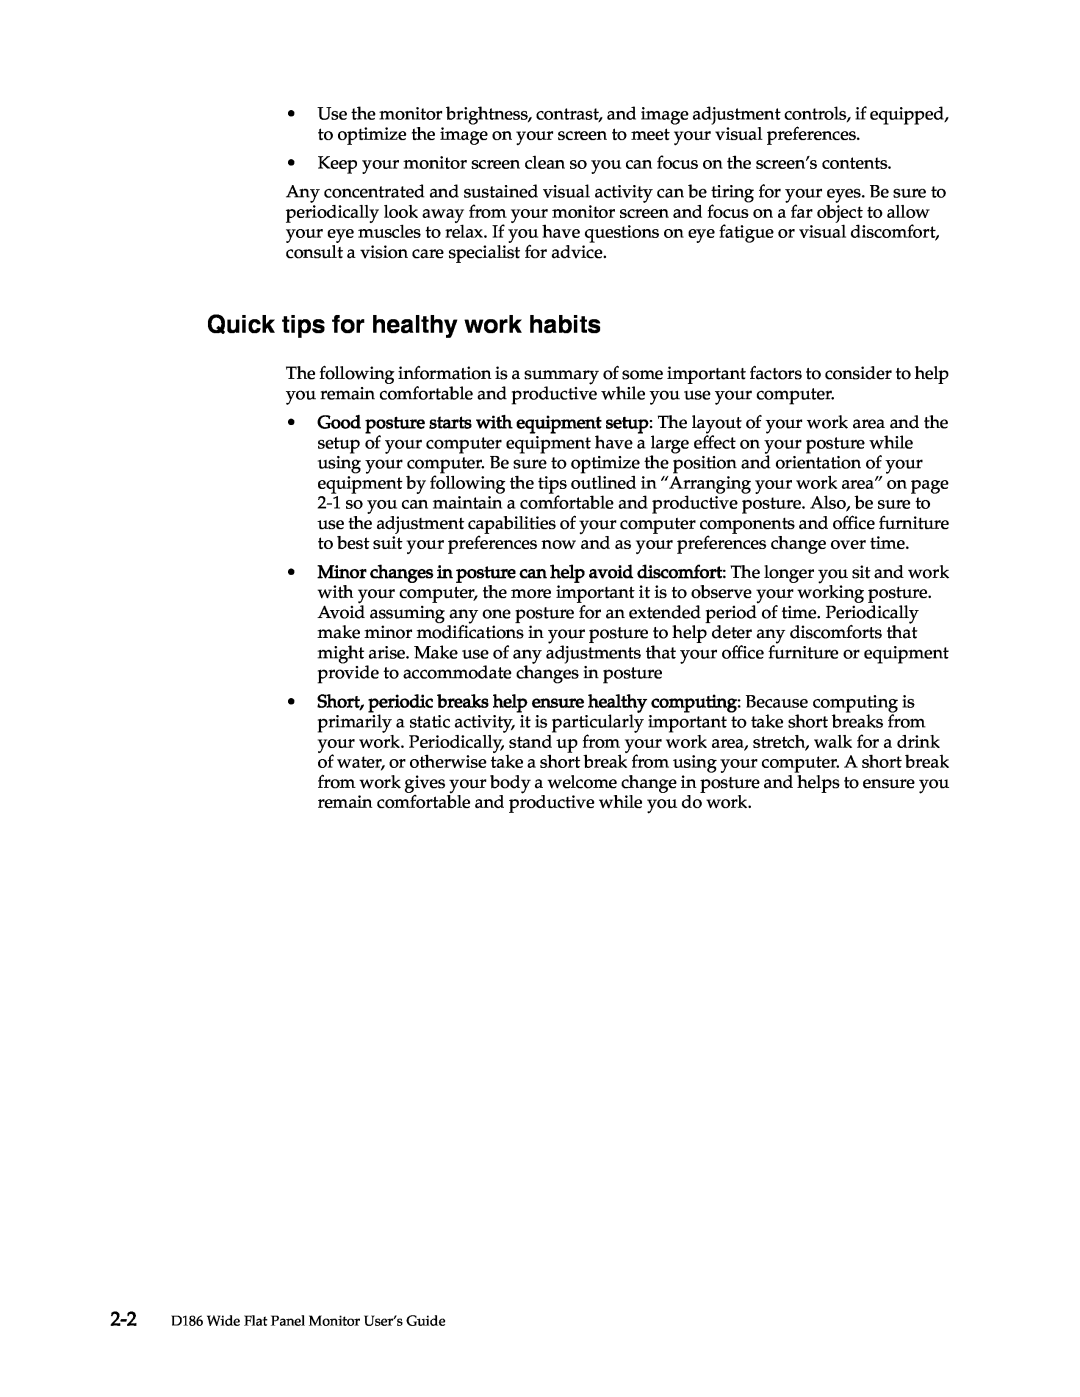 Lenovo manual Quick tips for healthy work habits, 2-2 D186 Wide Flat Panel Monitor User’s Guide 